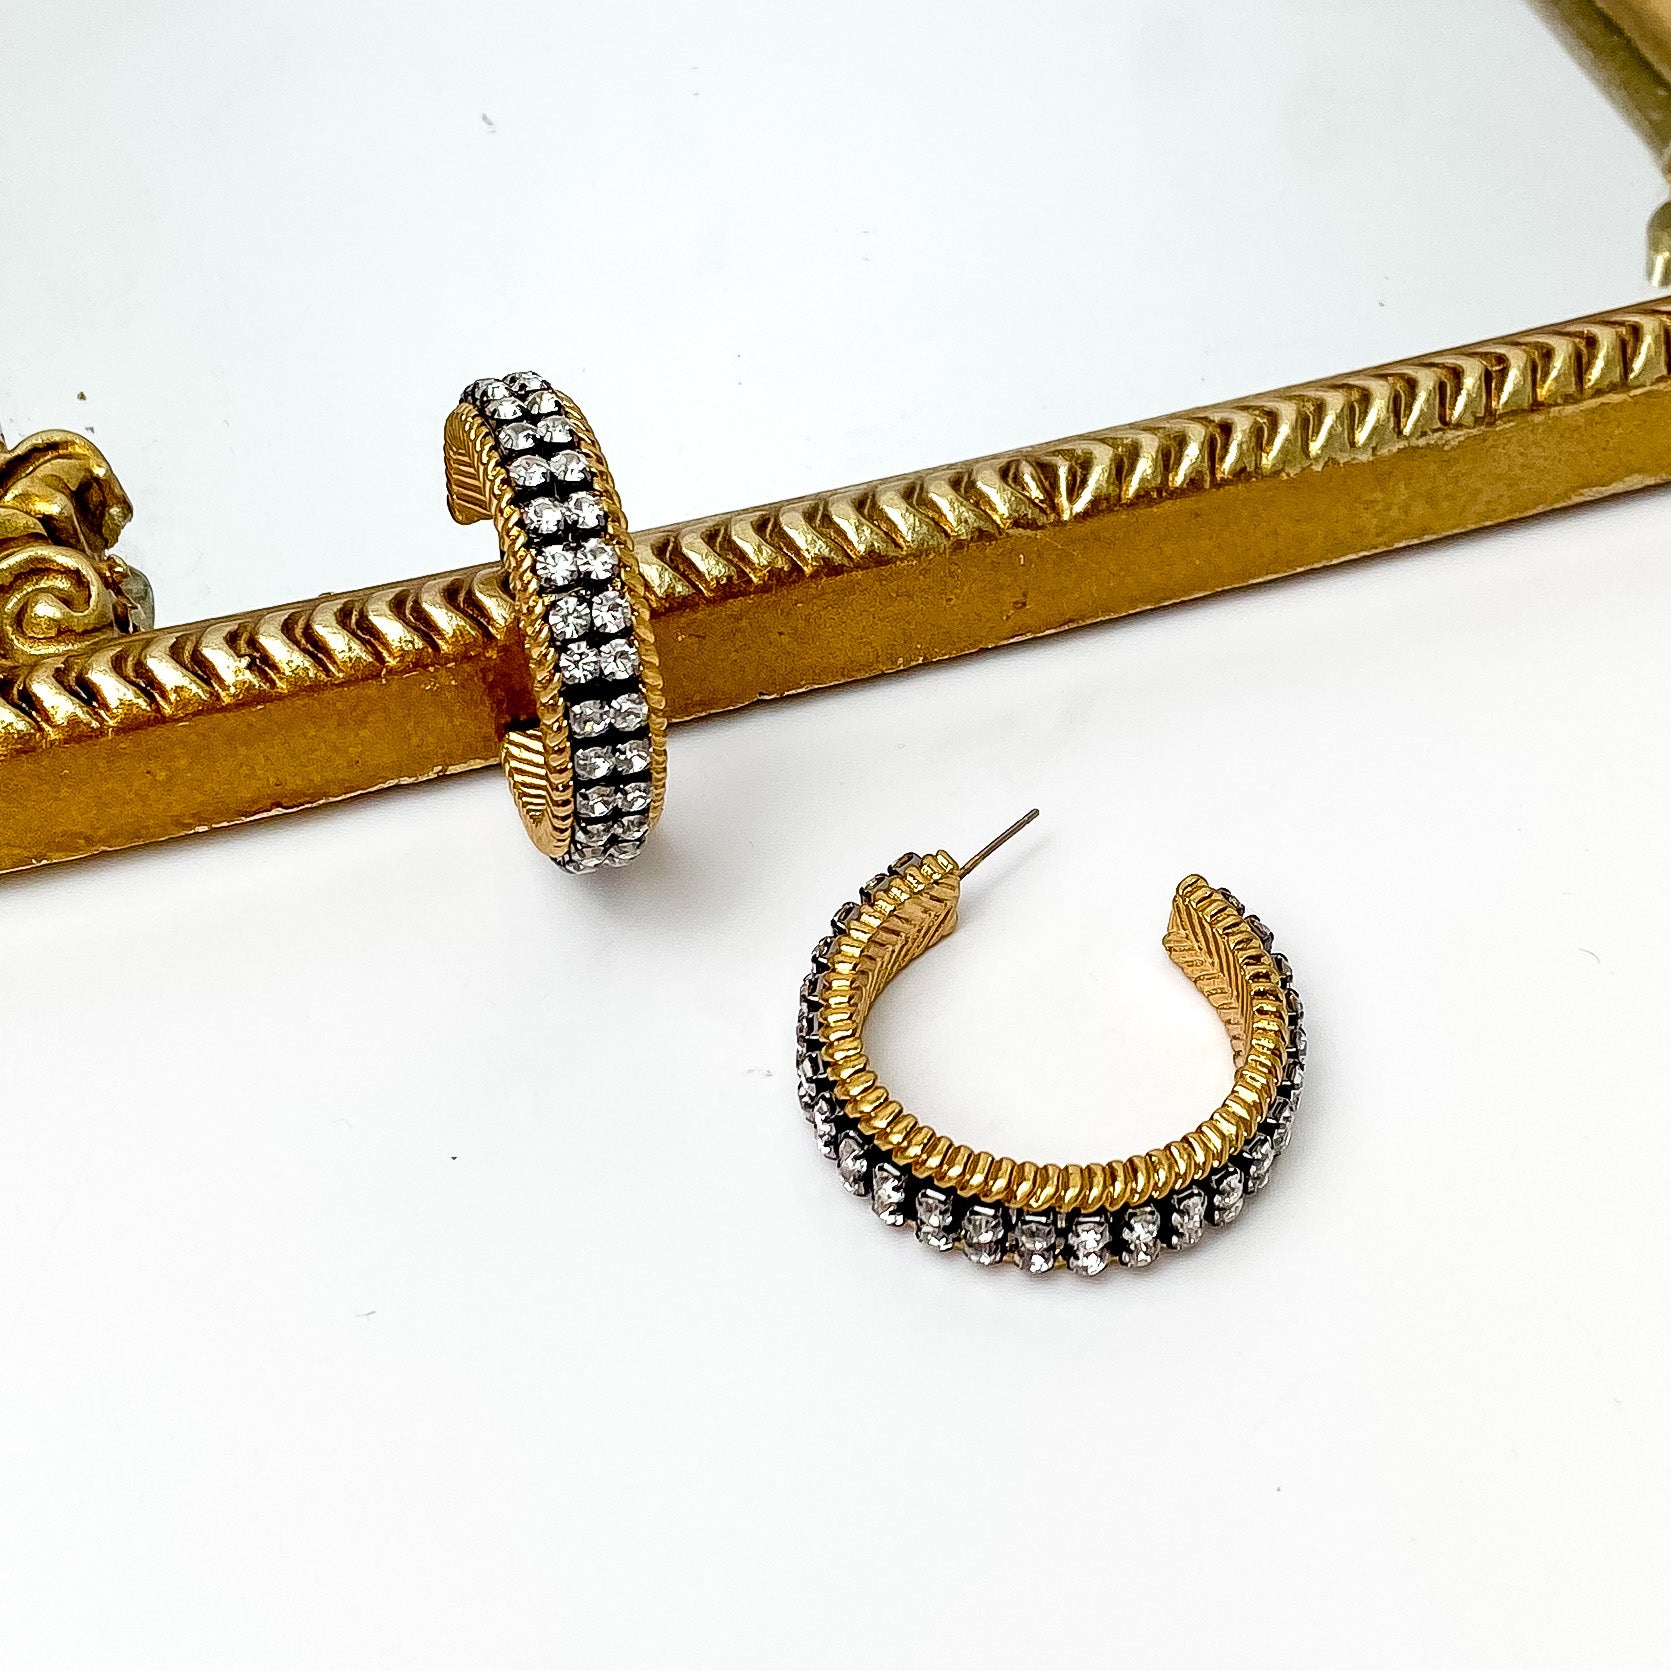 Clear Crystal Inlay and Gold Tone Hoop Earrings with Black Setting